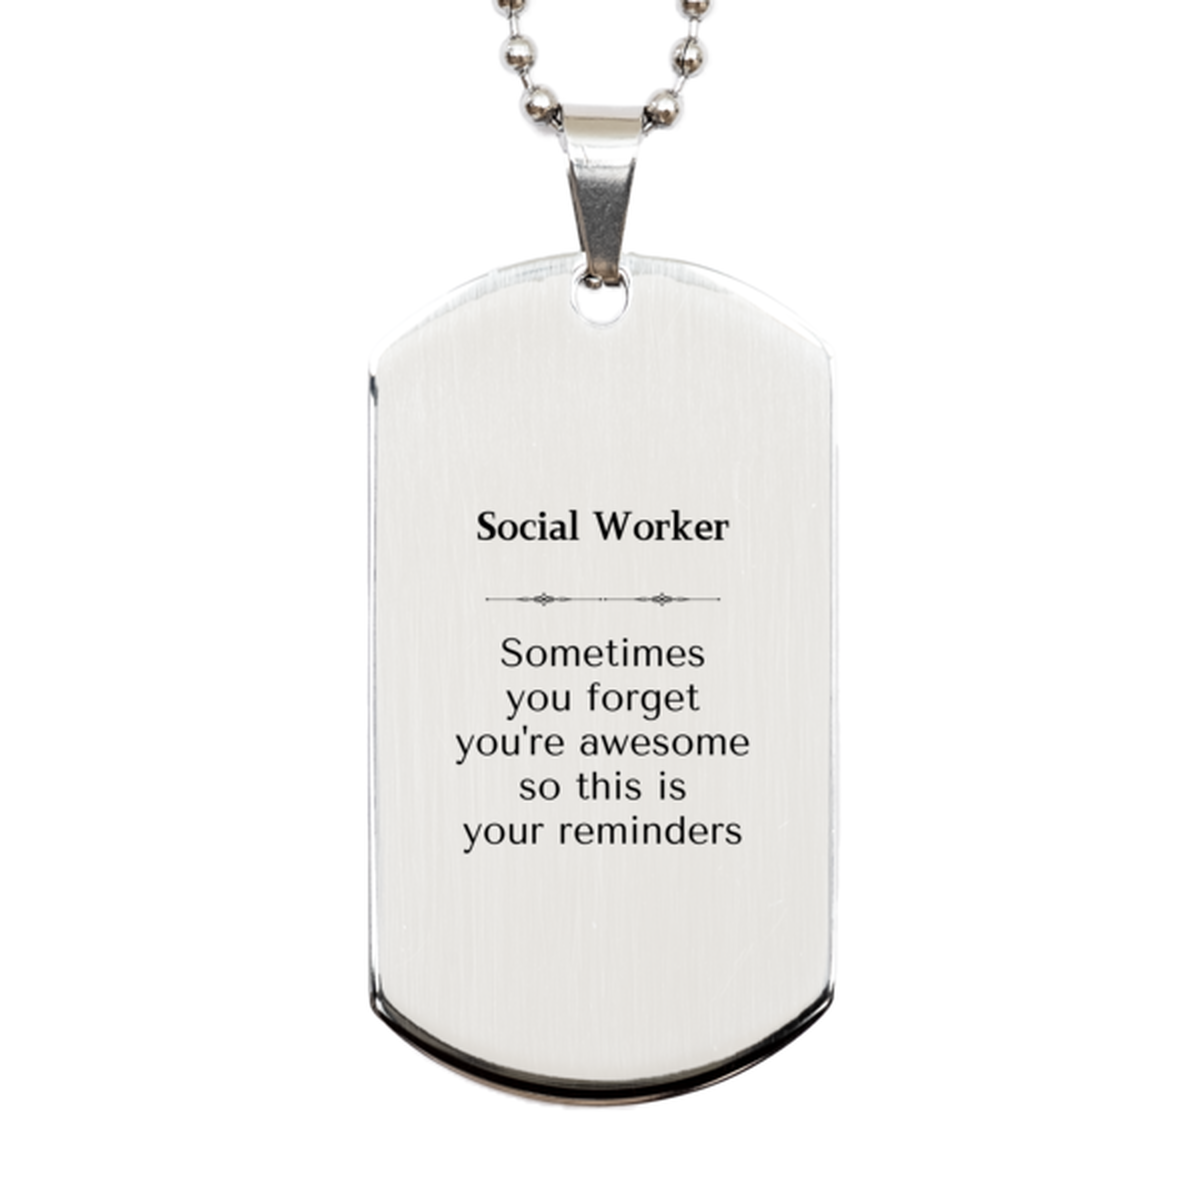 Sentimental Social Worker Silver Dog Tag, Social Worker Sometimes you forget you're awesome so this is your reminders, Graduation Christmas Birthday Gifts for Social Worker, Men, Women, Coworkers